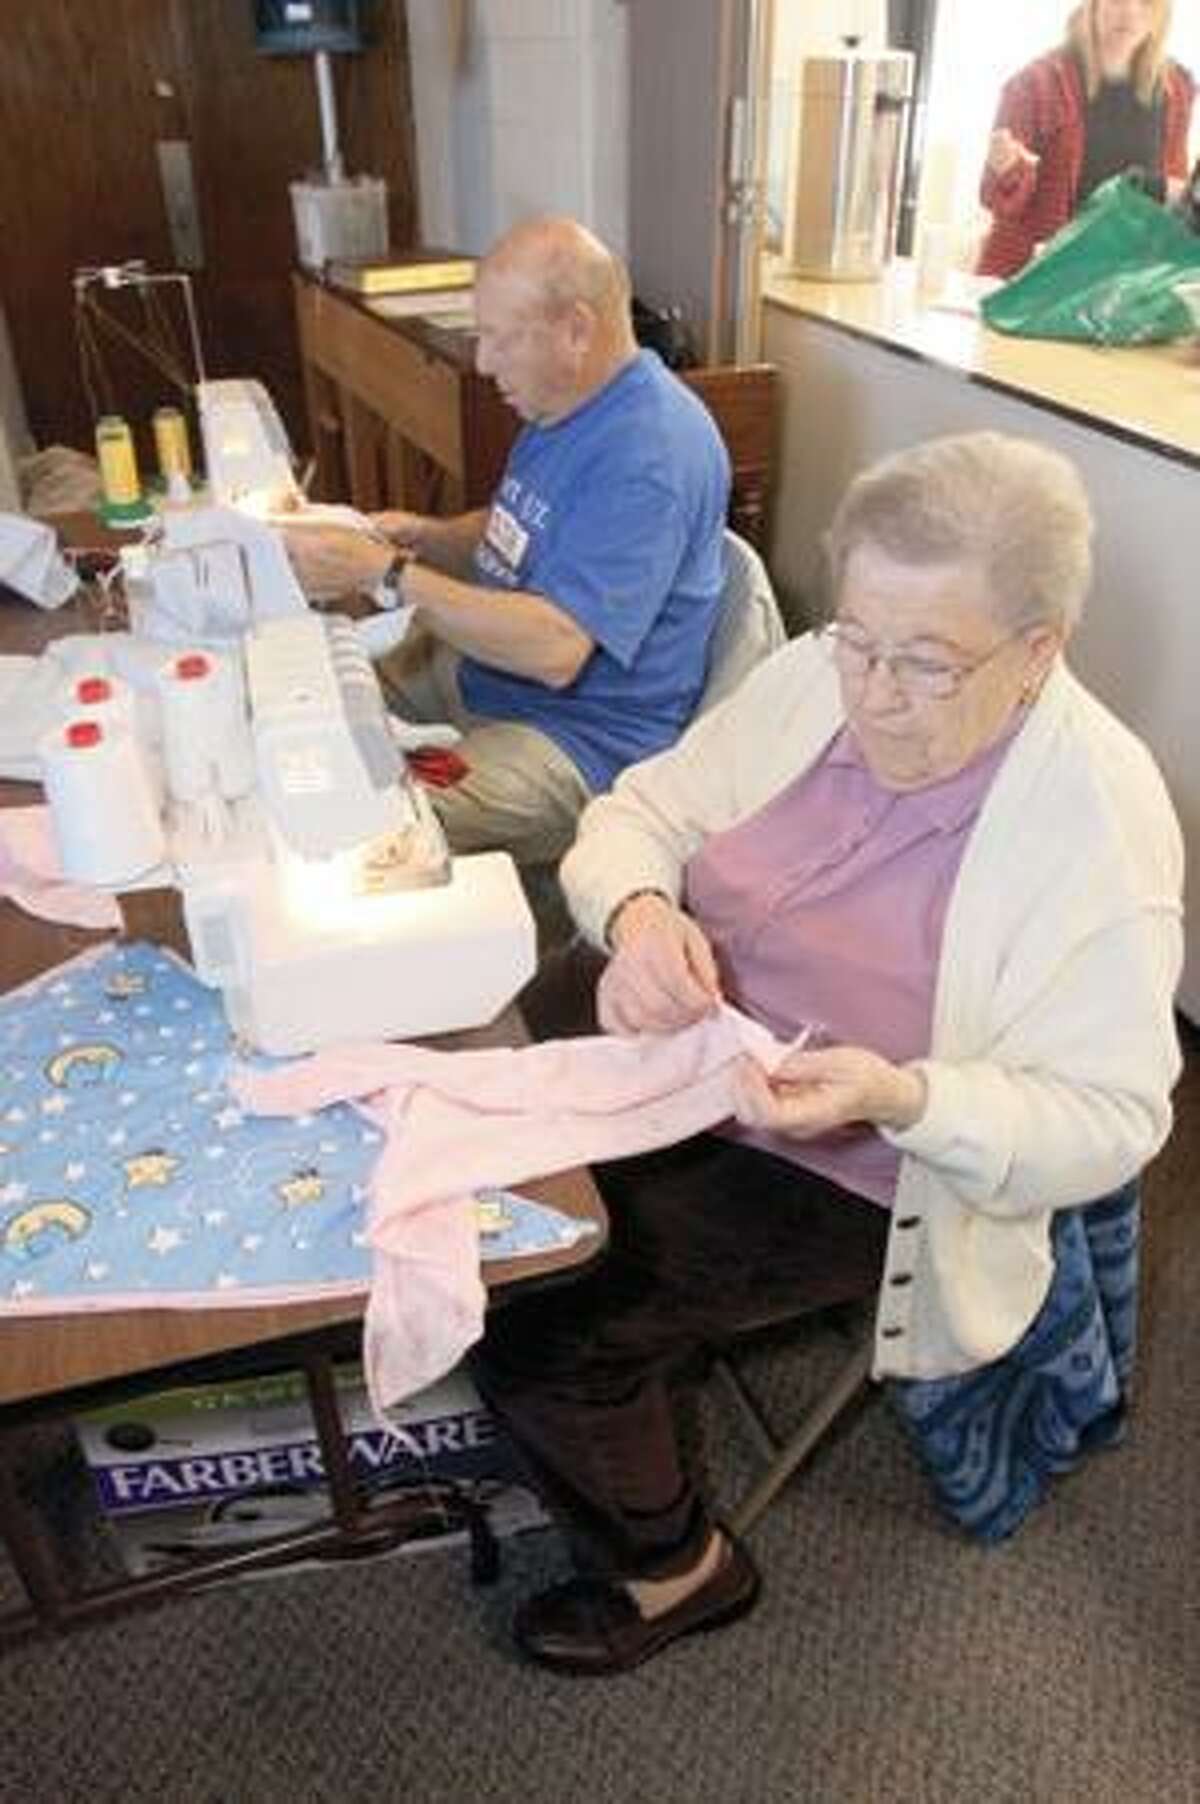 SONJA ZINKE/Register CitizenJulia Jalbert and John Mazzochi sew CUREchiefs as a host of other volunteers cut, fold and package them at the Immaculate Heart of Mary Church in Harwinton Saturday. The group is expected to make their 60,000th CUREchief Saturday. Purchase a glossy print of this photo and more at www.registercitizen.com